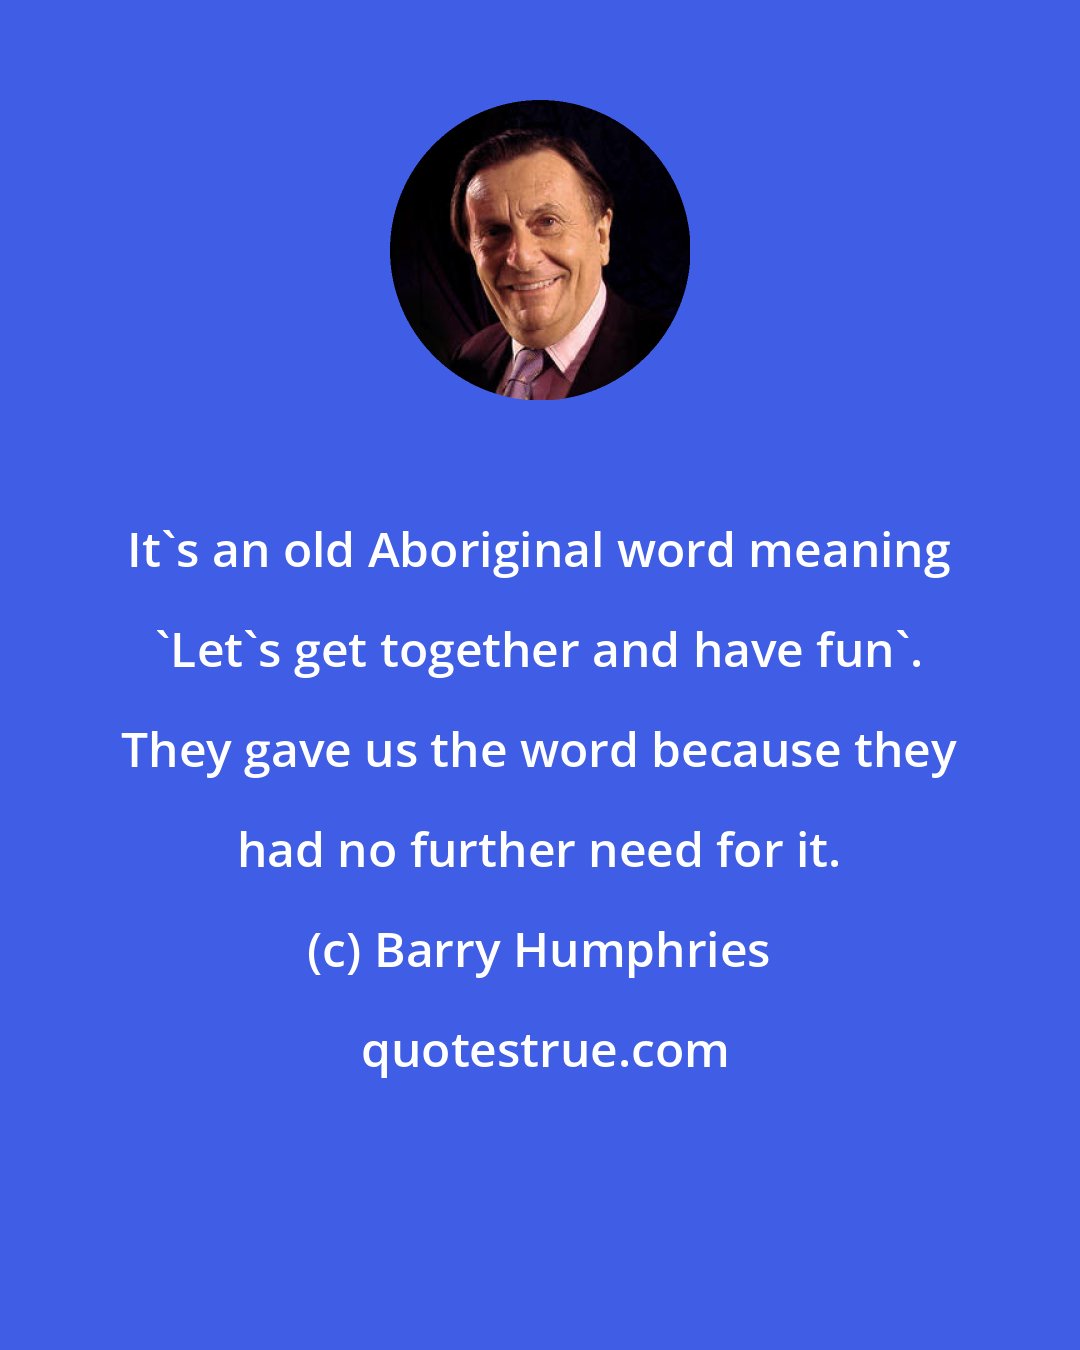 Barry Humphries: It's an old Aboriginal word meaning 'Let's get together and have fun'. They gave us the word because they had no further need for it.